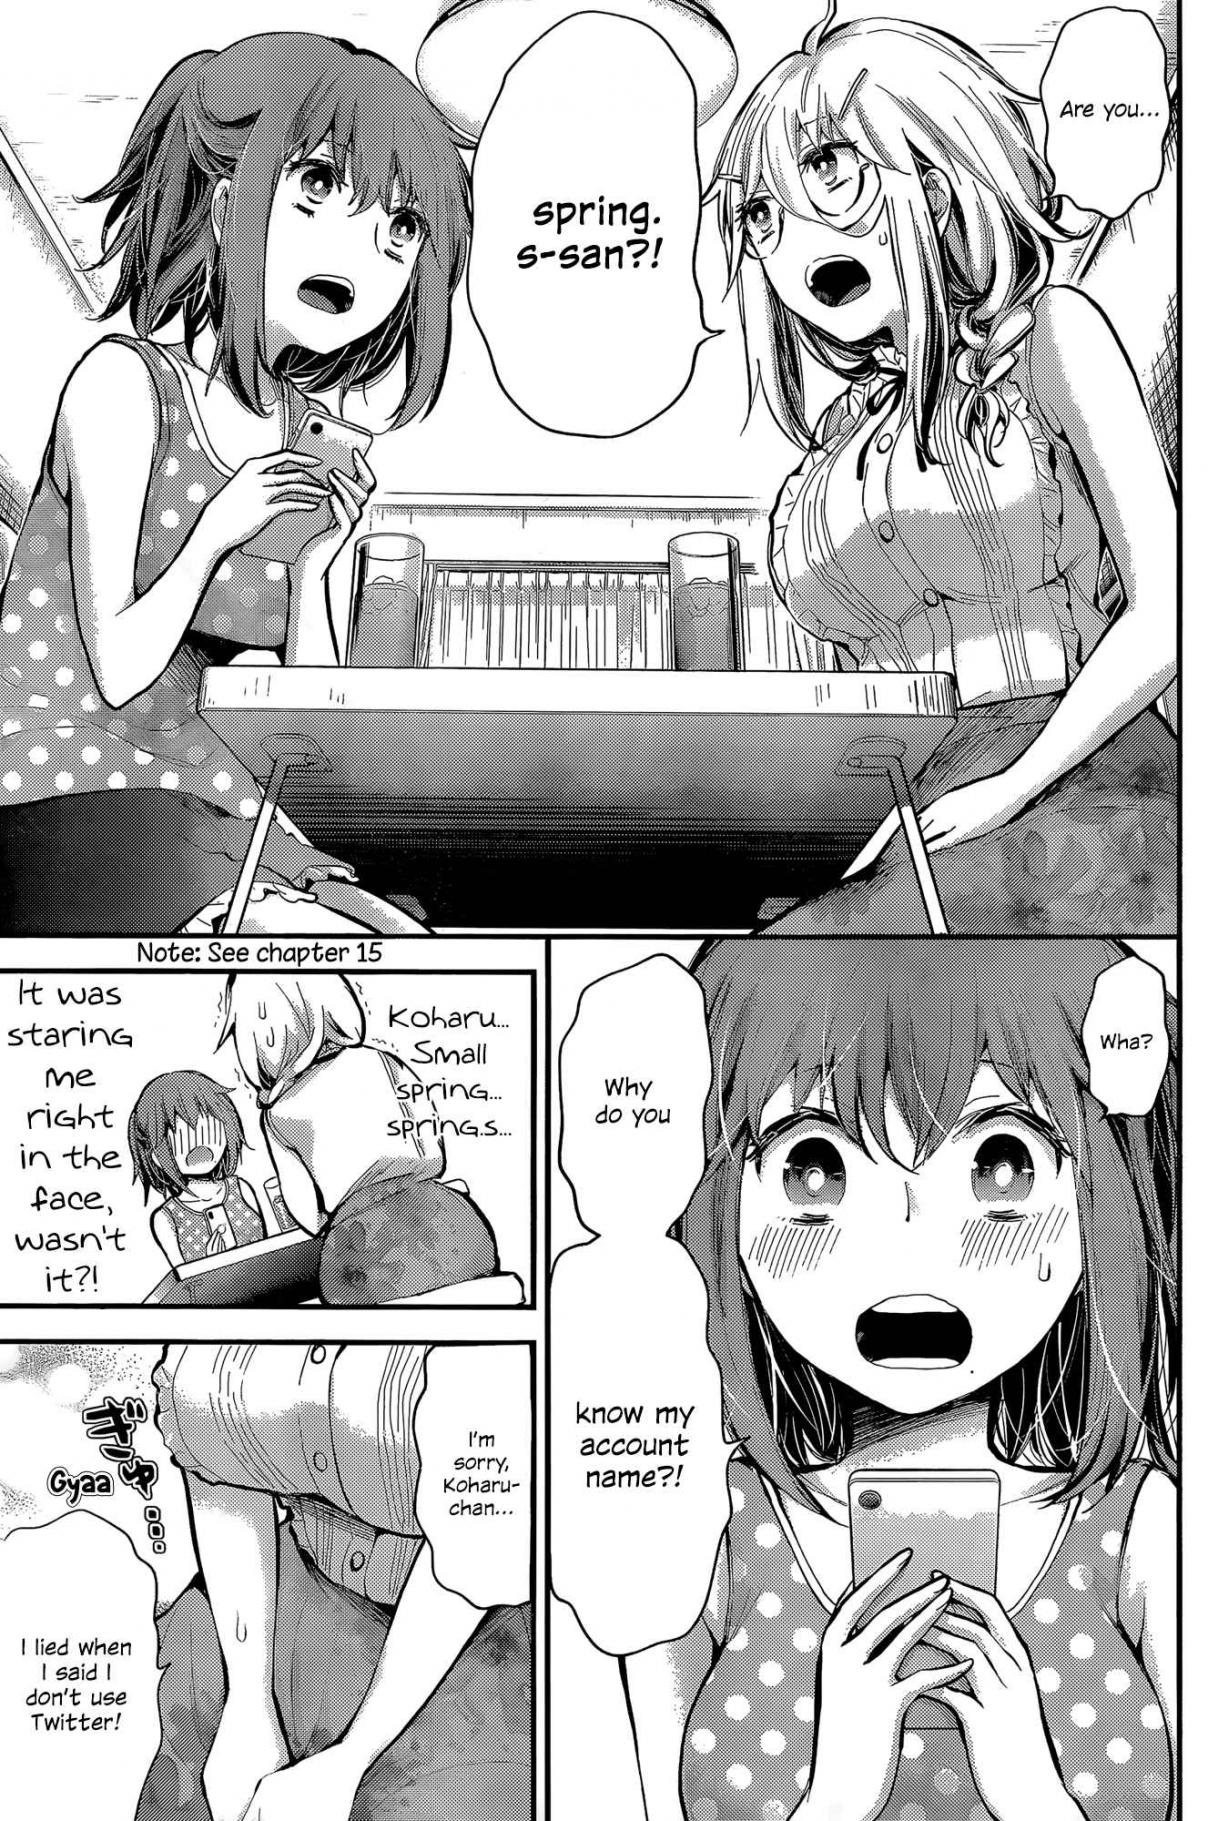 Shingeki no Eroko san Vol. 3 Ch. 18 Perversion 18 While the Hoshi’s away, the mice I mean girls will play! I’m so nervous!